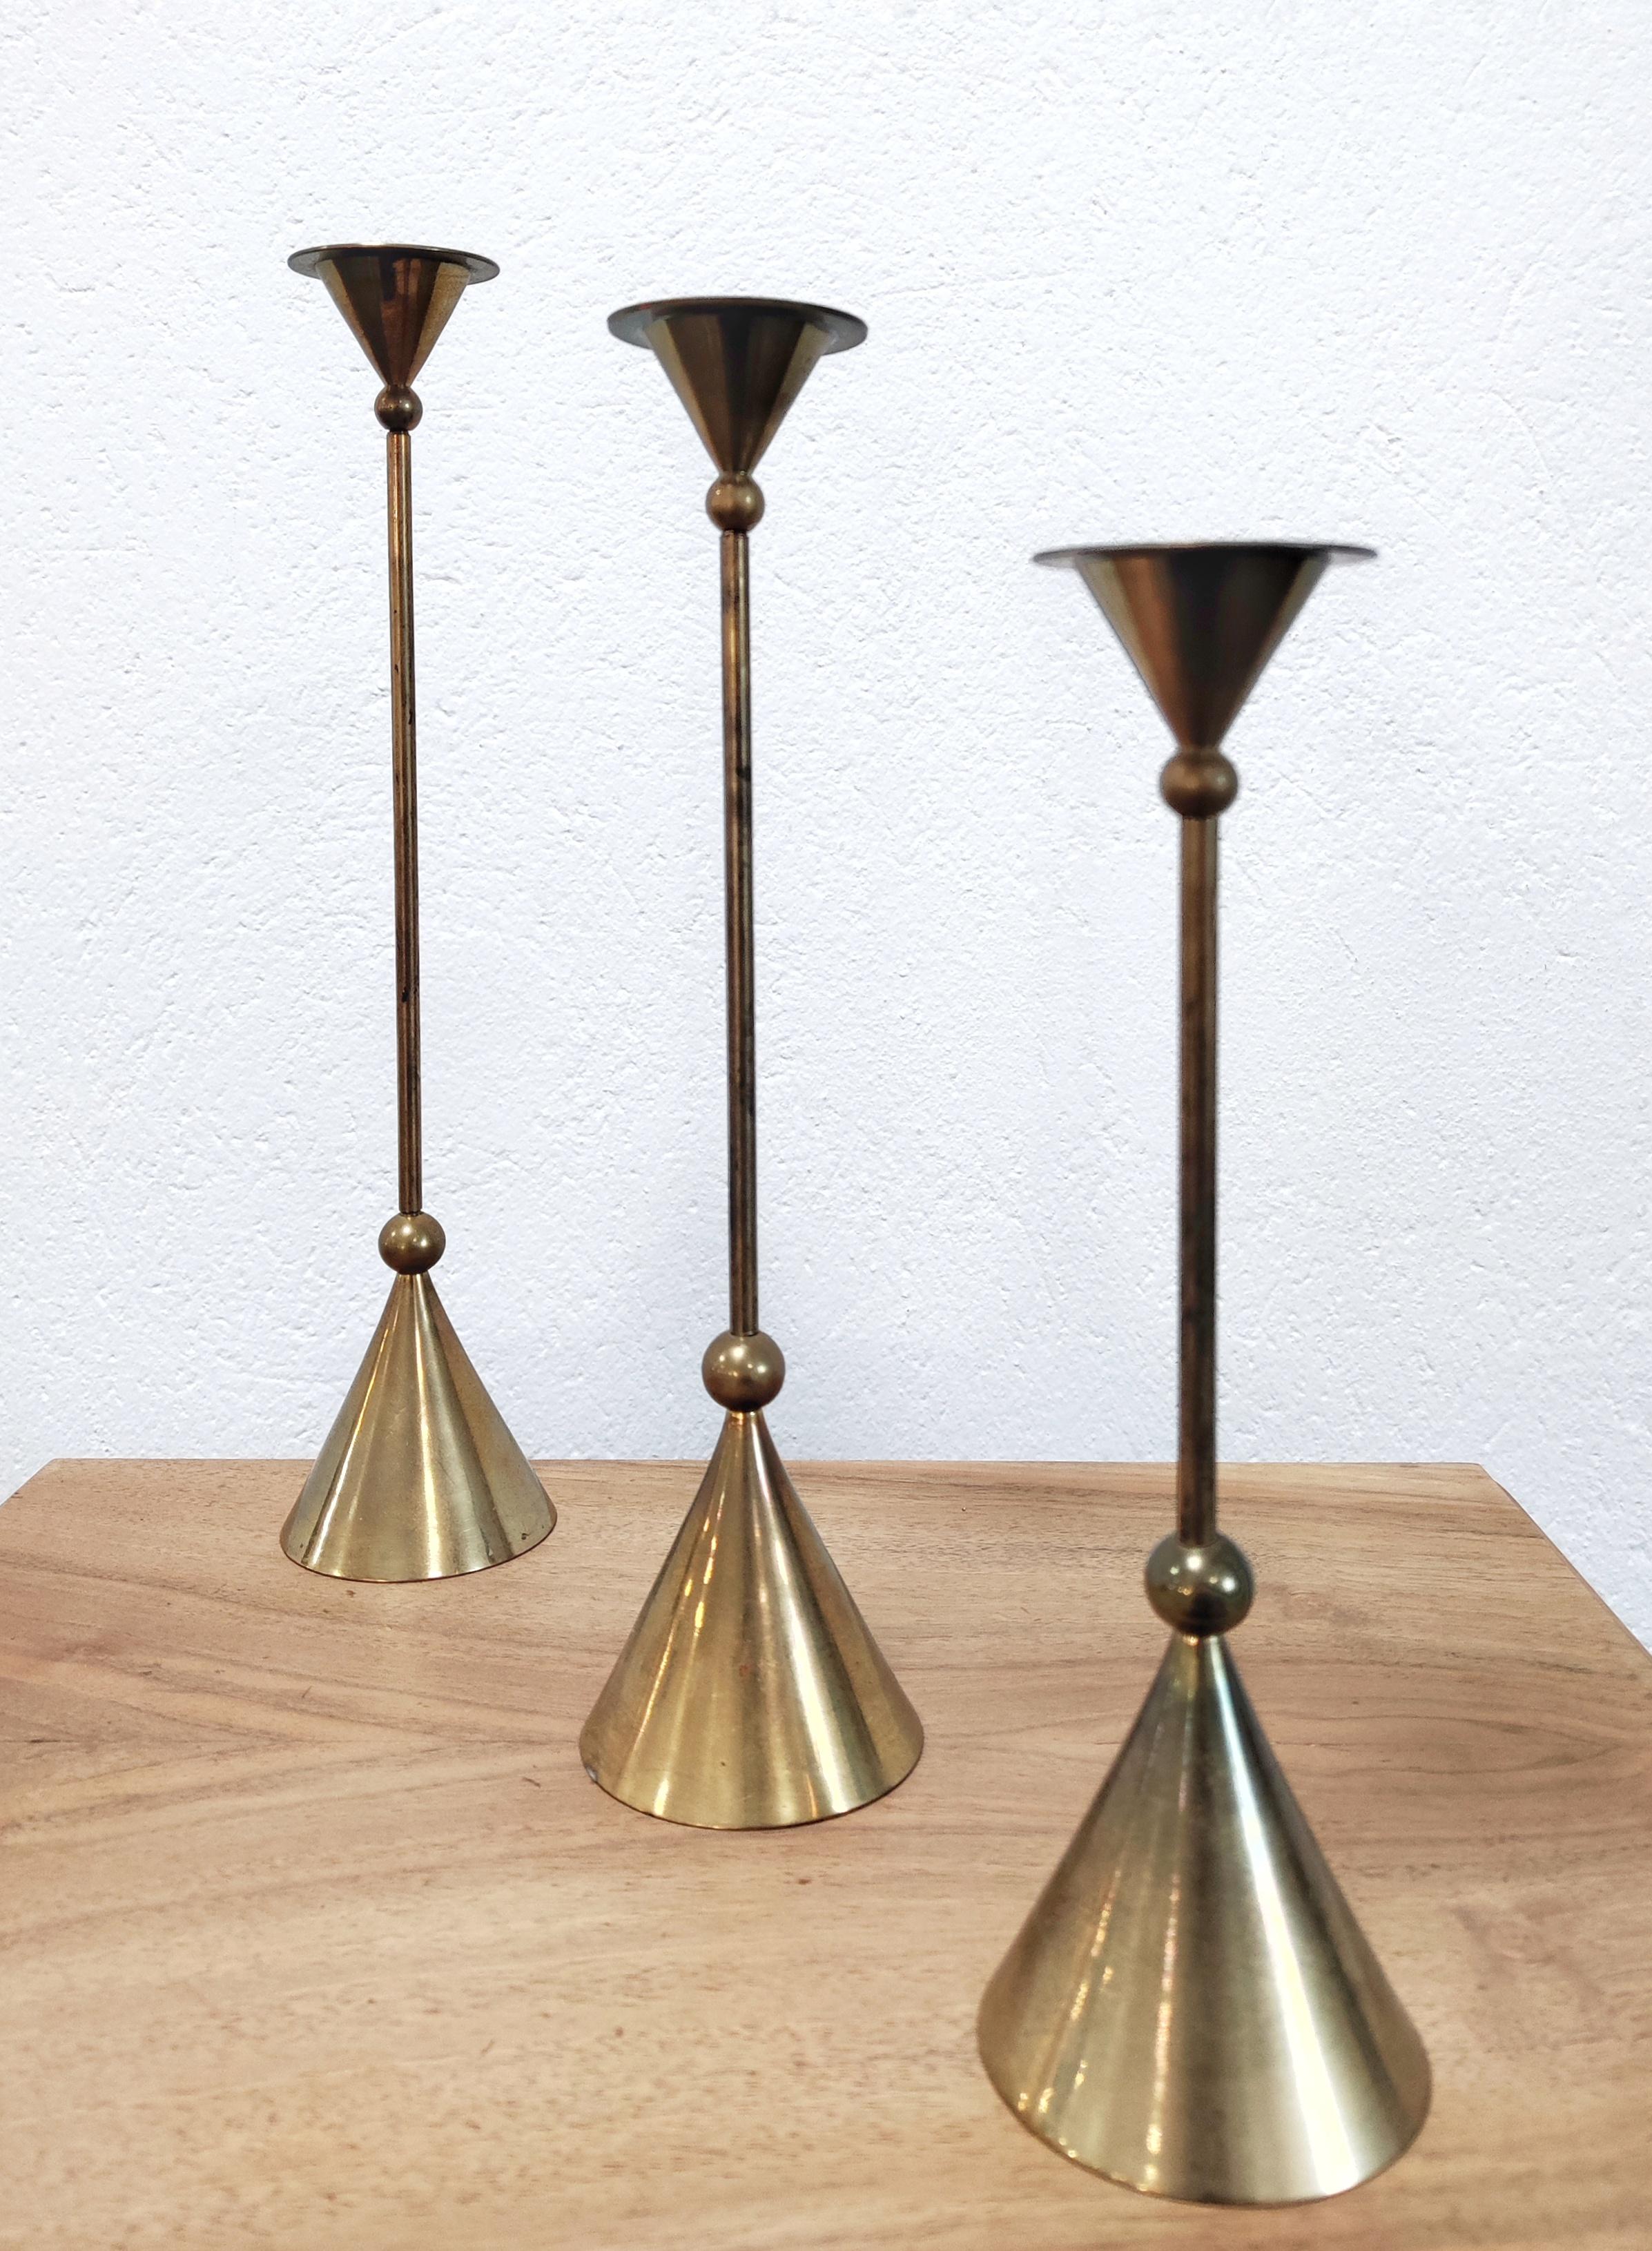 In this listing you will find a set of three candlestick holders done in bronze. Candlestick are designed by Christian de Beaumont in France in 1980s. They come in three different sizes, making them easy to play with and create attractive